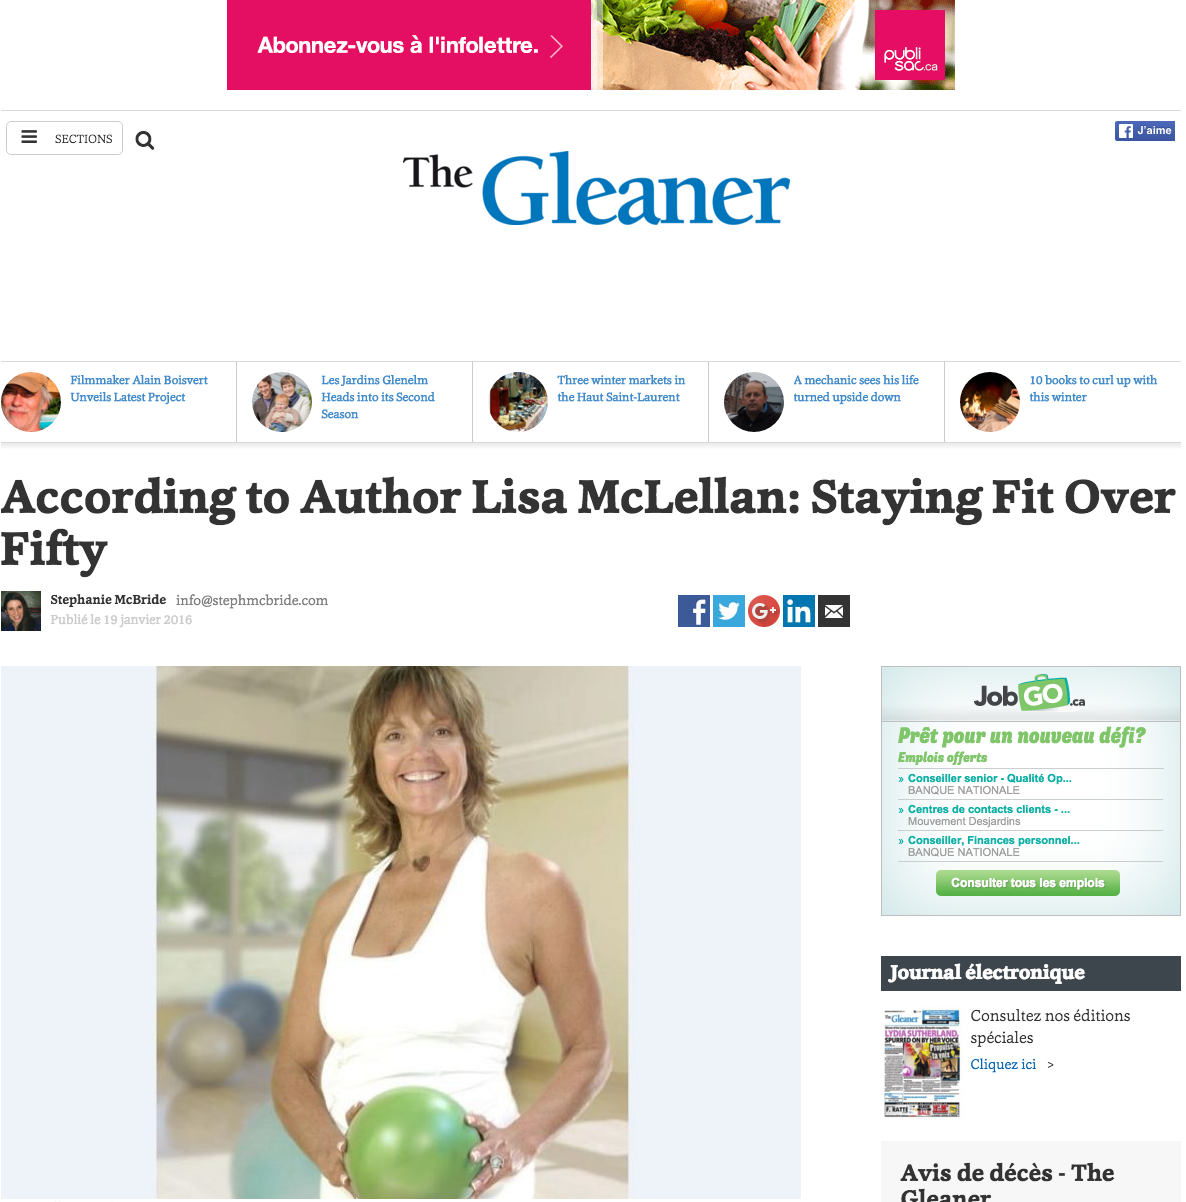 Staying Fit Over Fifty - The Gleaner - Lisa McLellan